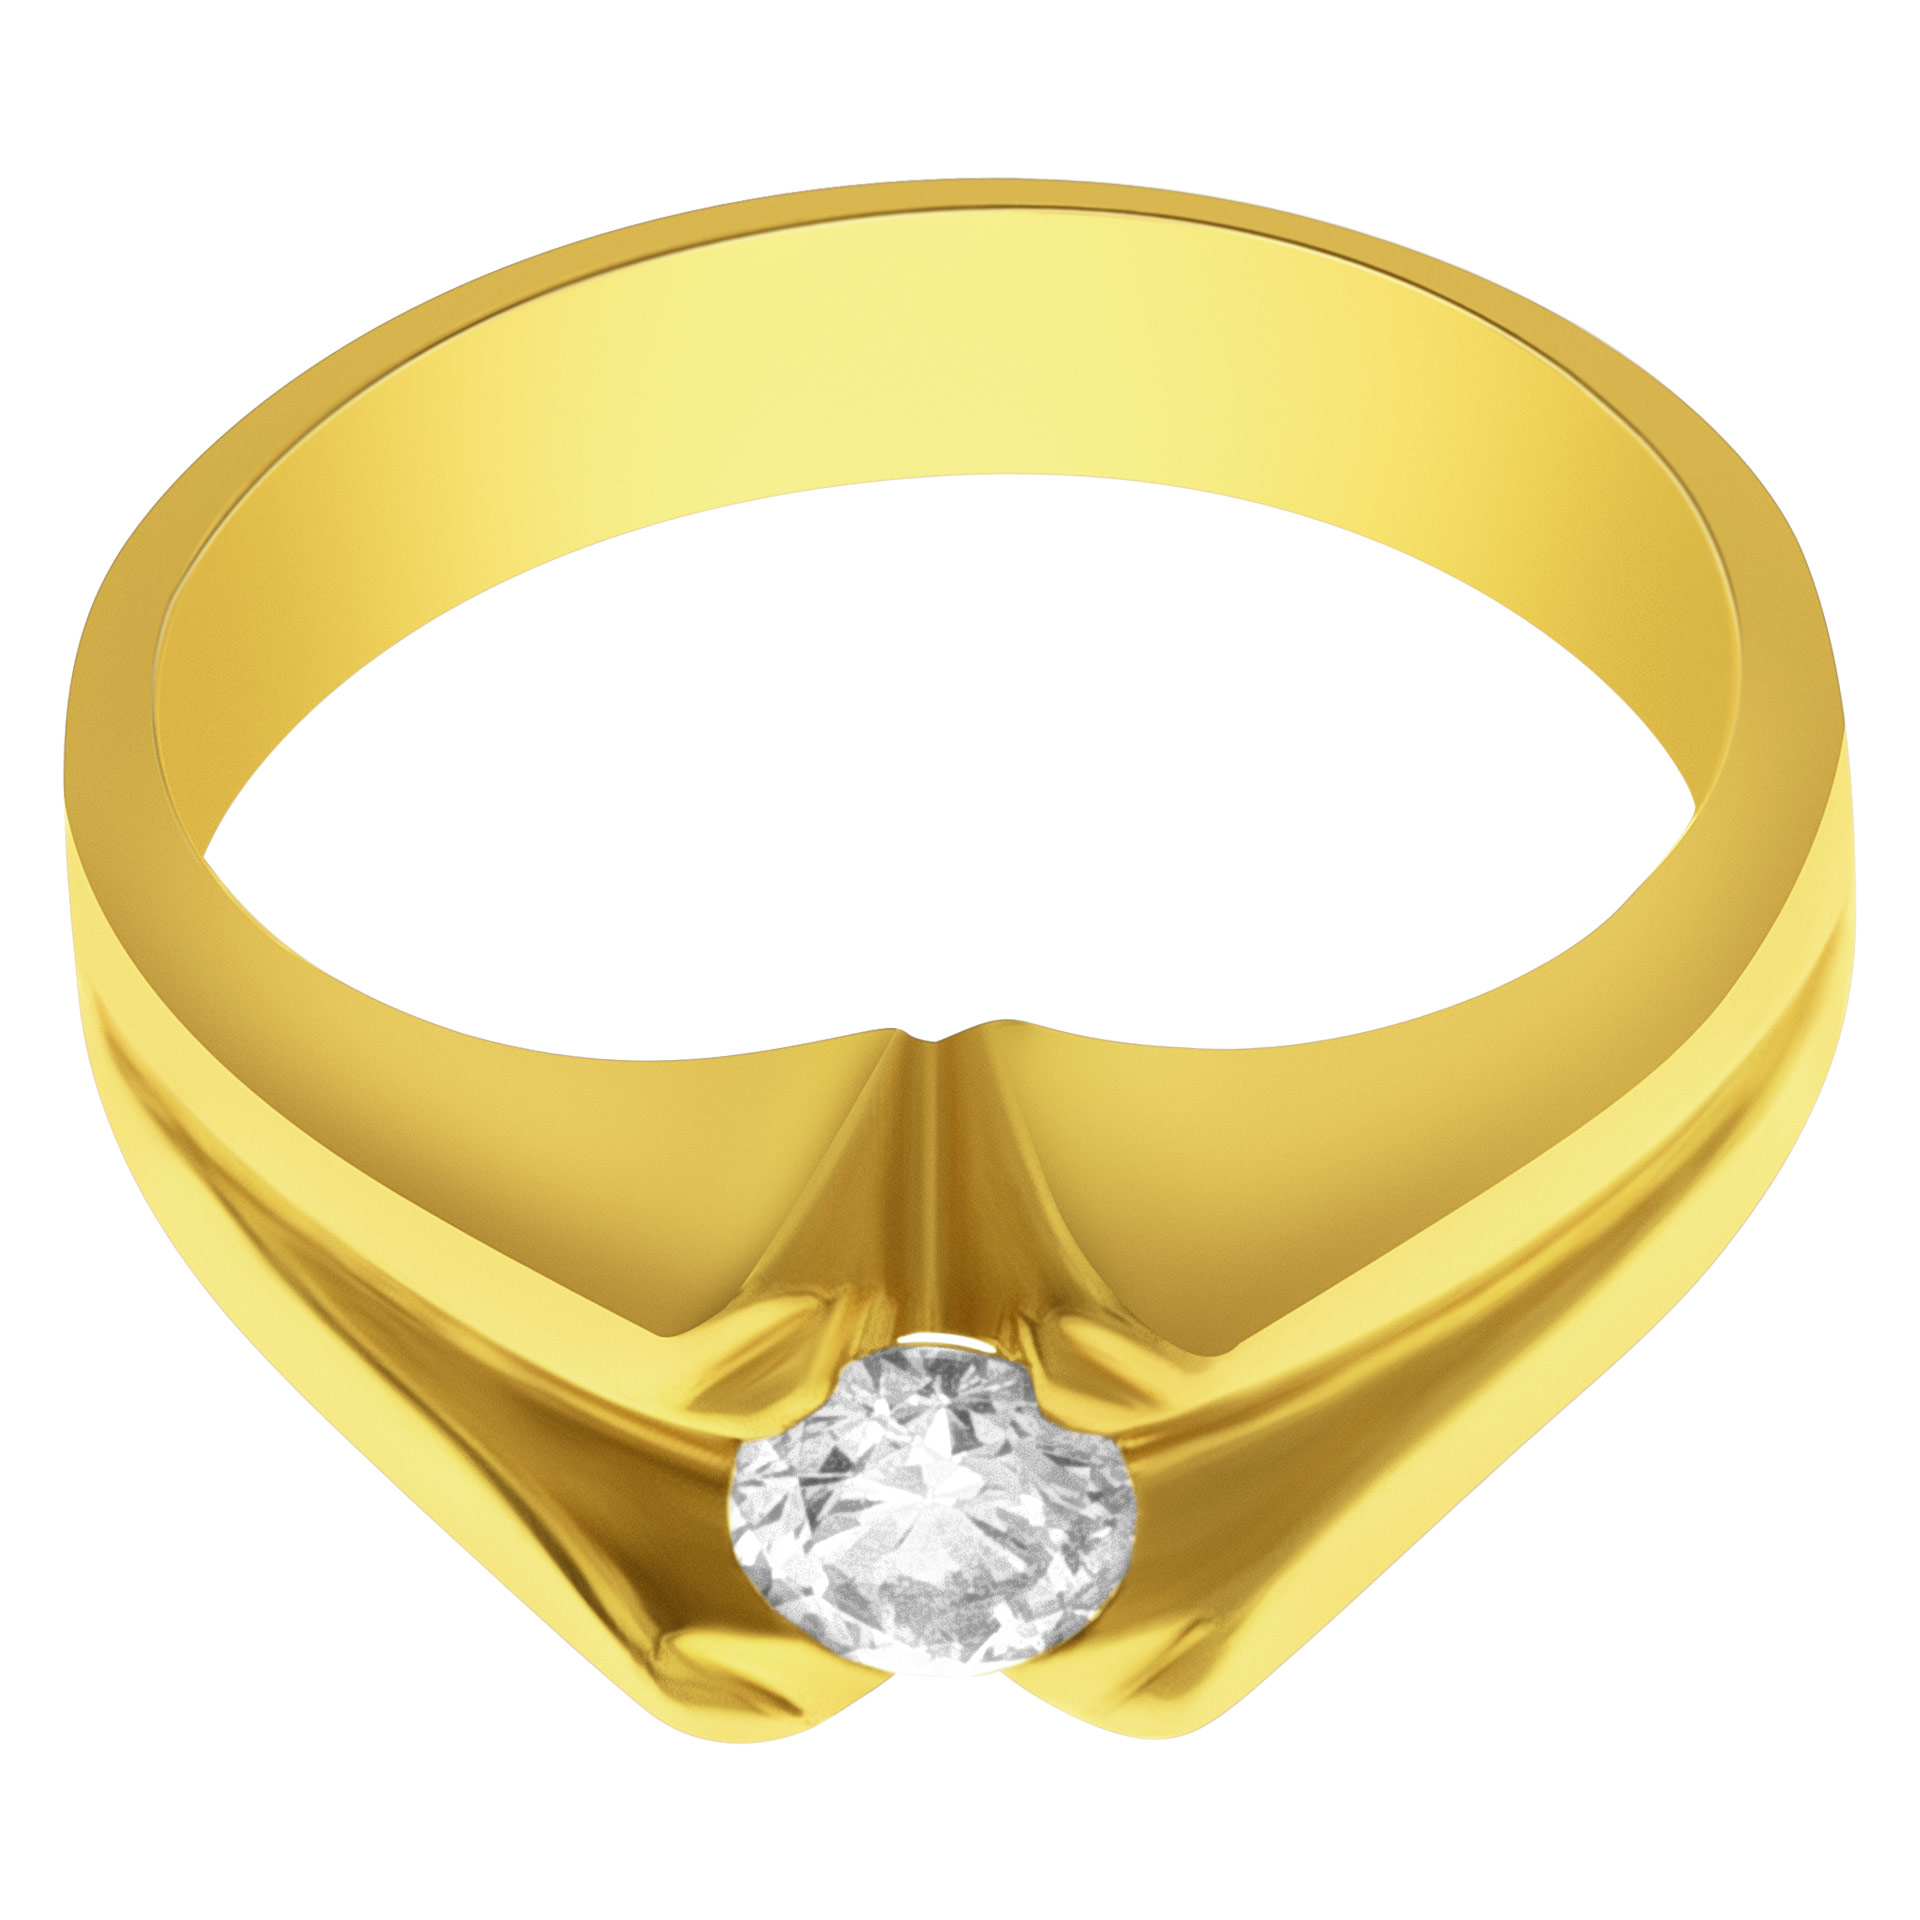 Gents solitare diamong ring in 18k yellow gold. 0.45 carat diamond. Size 10.5